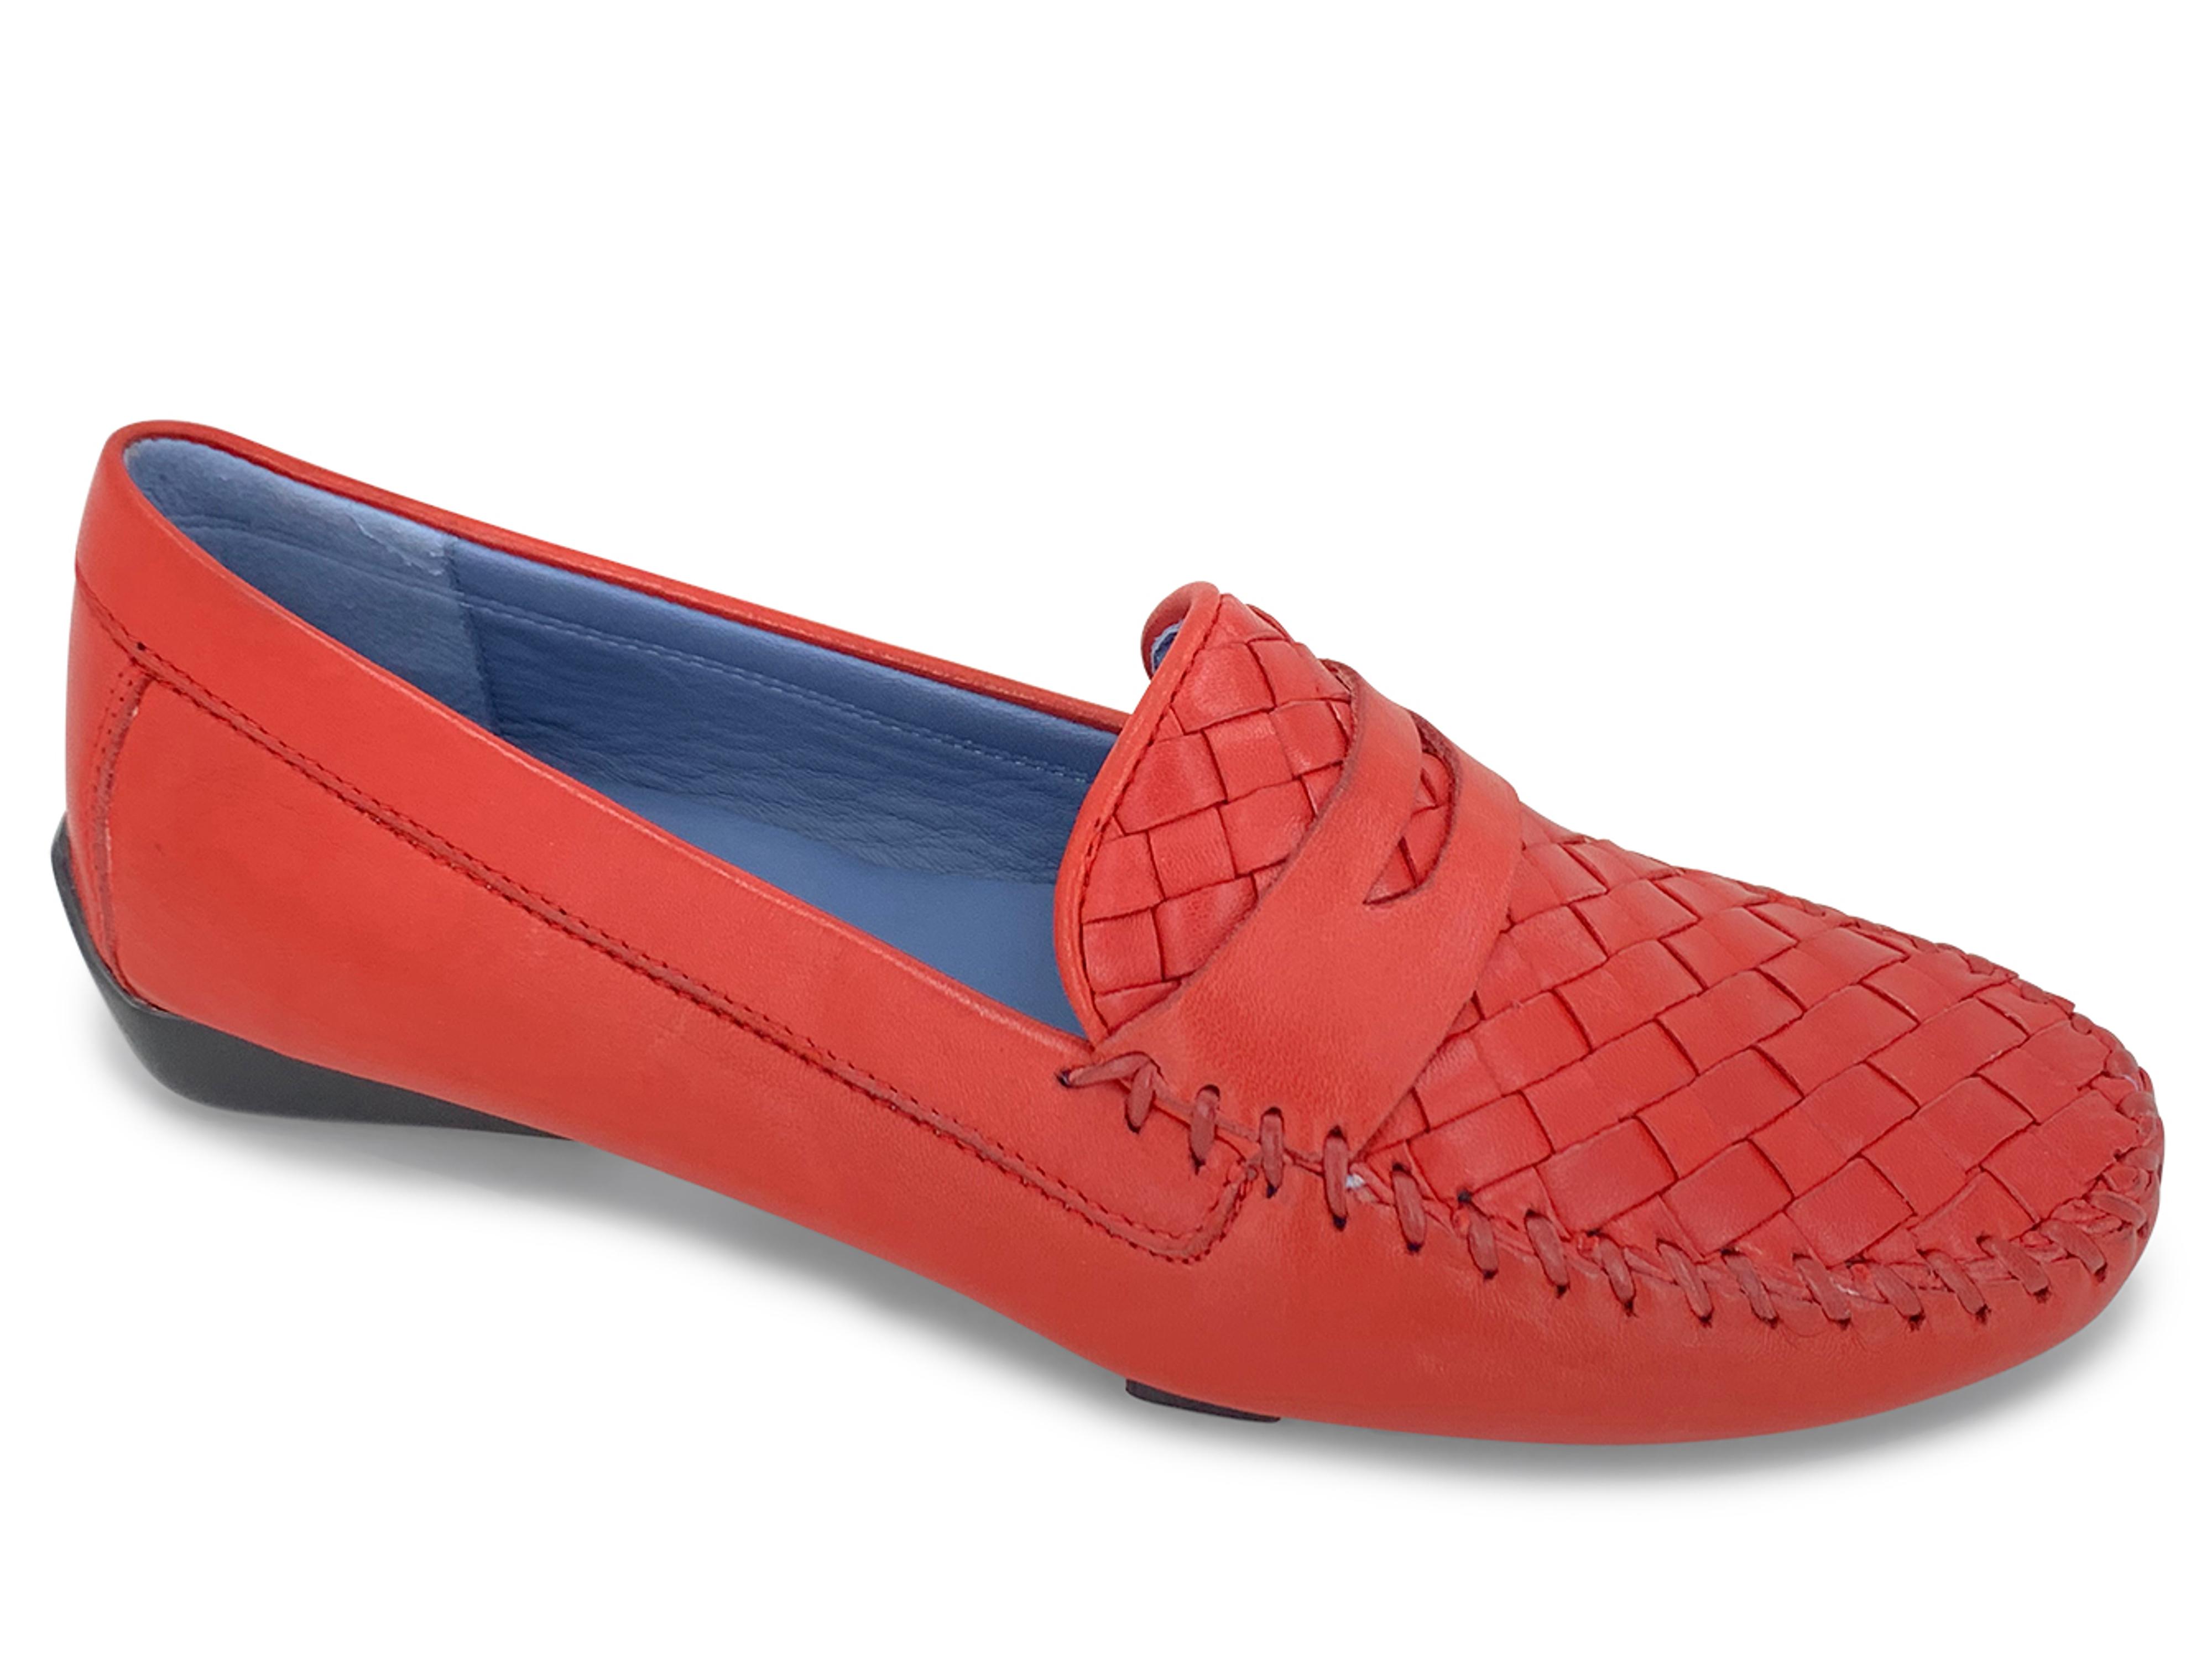 Women's Comfort Shoes - Popular Designers, Latest Trends : The Shoe Spa